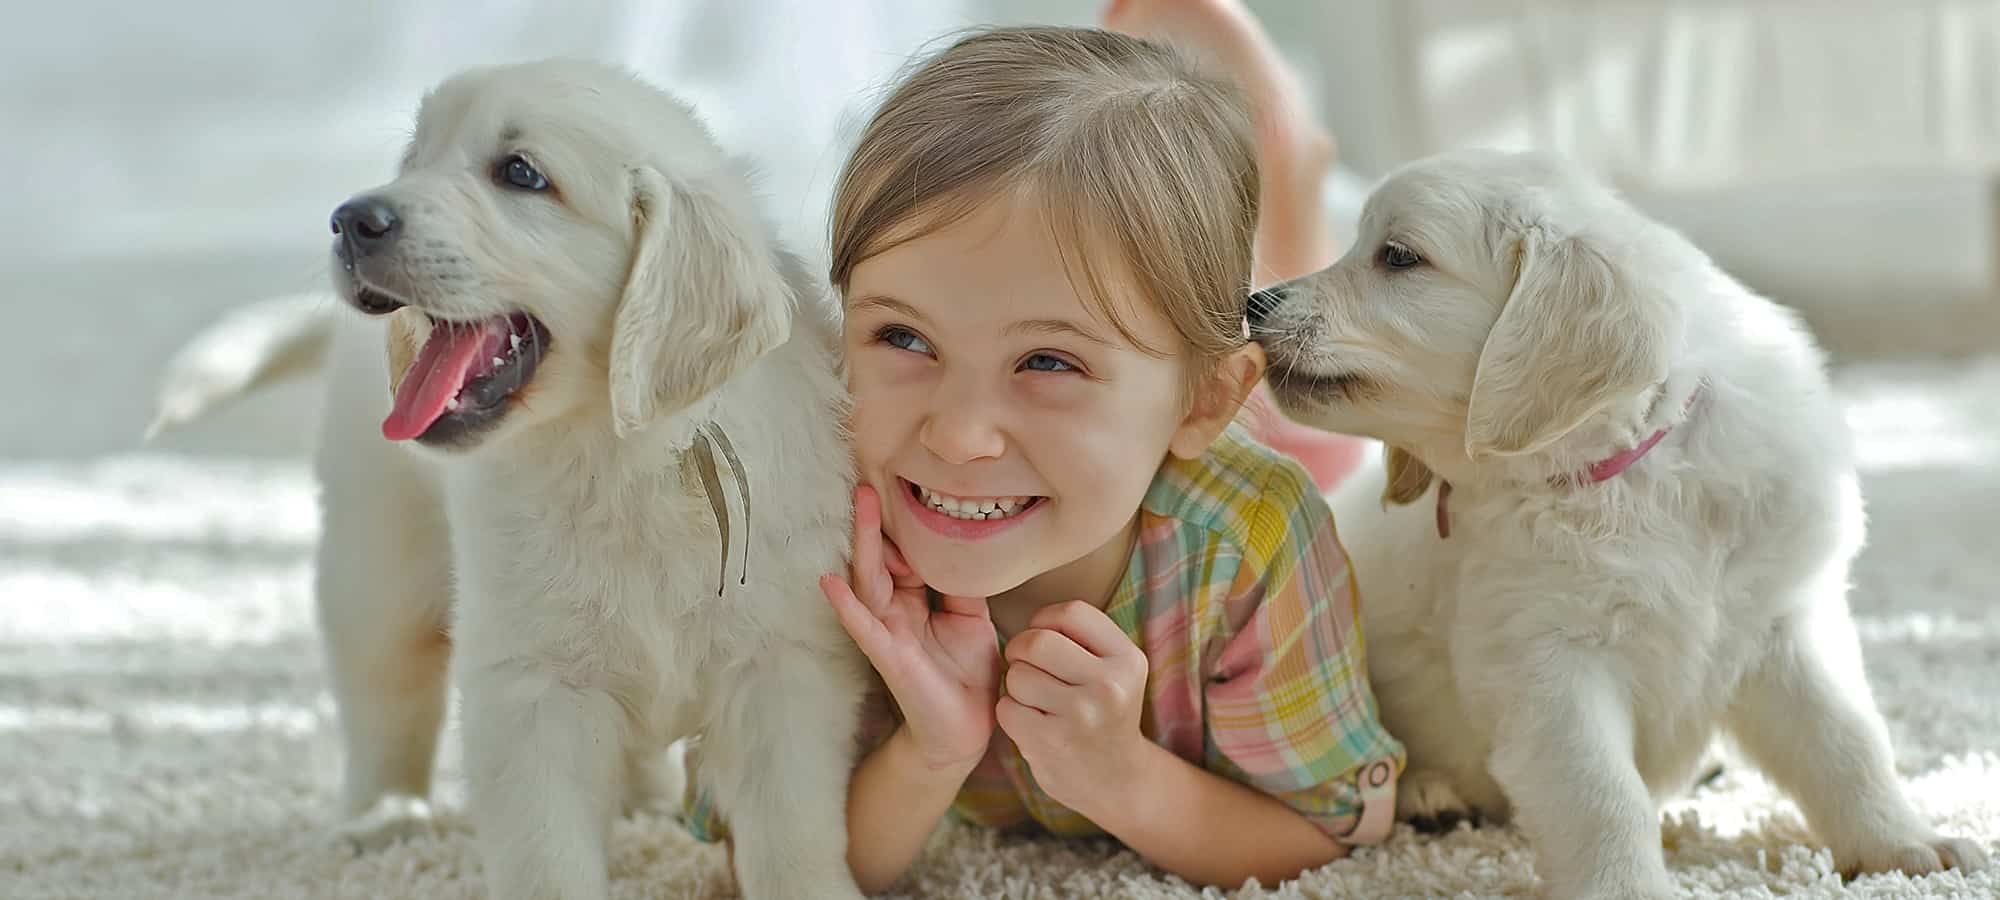 What Pets Should We Avoid if We Want an Easy First Pet?